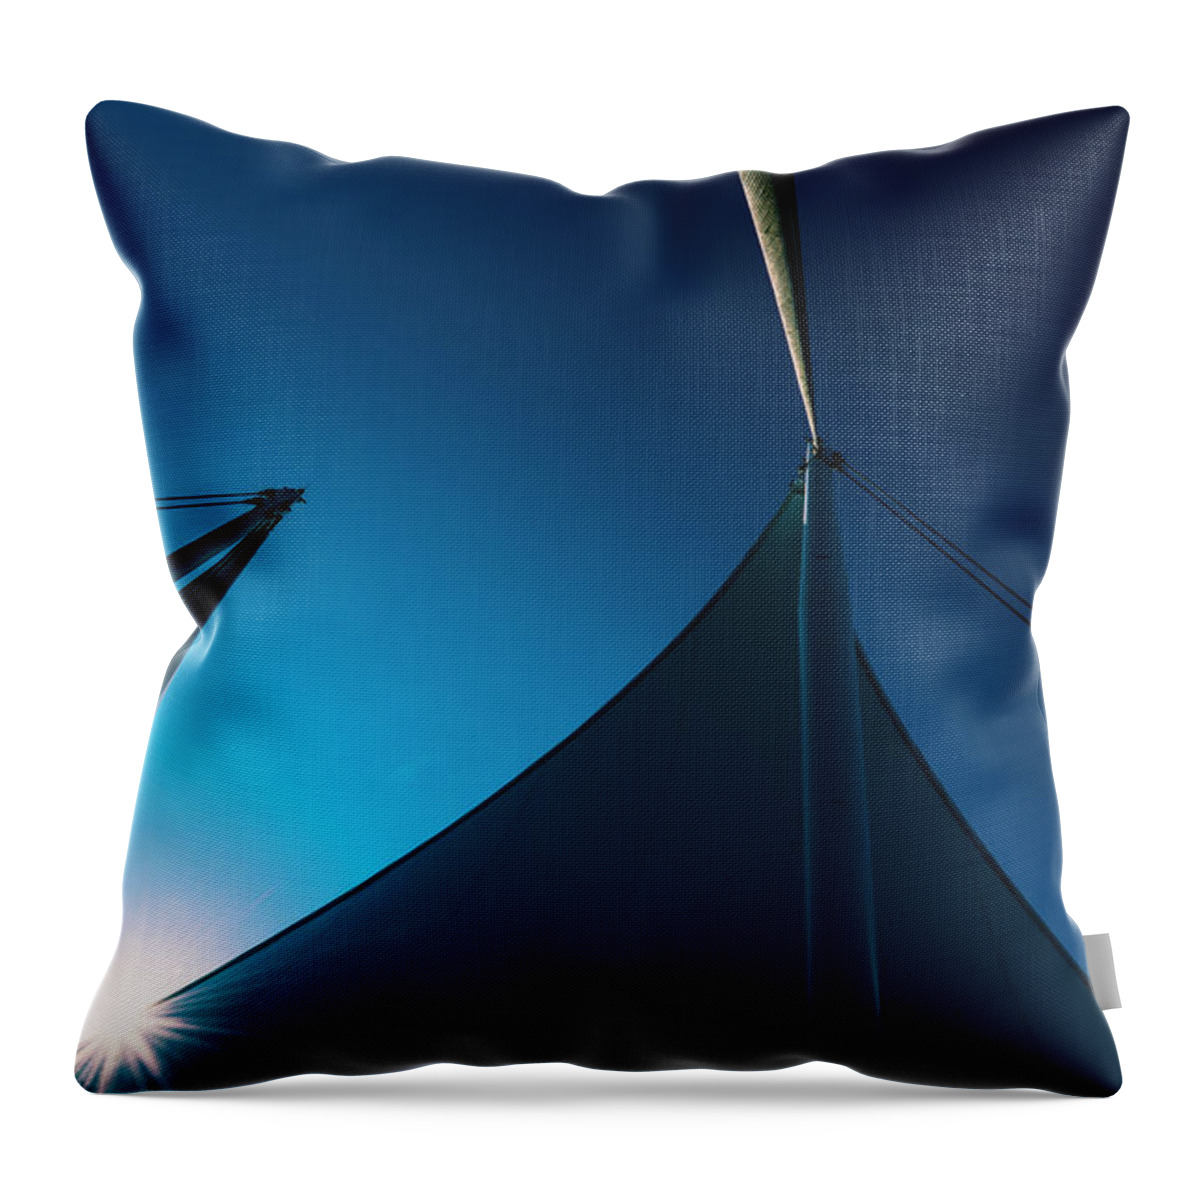 Port Of Vancouver Throw Pillow featuring the photograph 0194 Port of Vancouver Sails Canada Place by Amyn Nasser Neptune Gallery